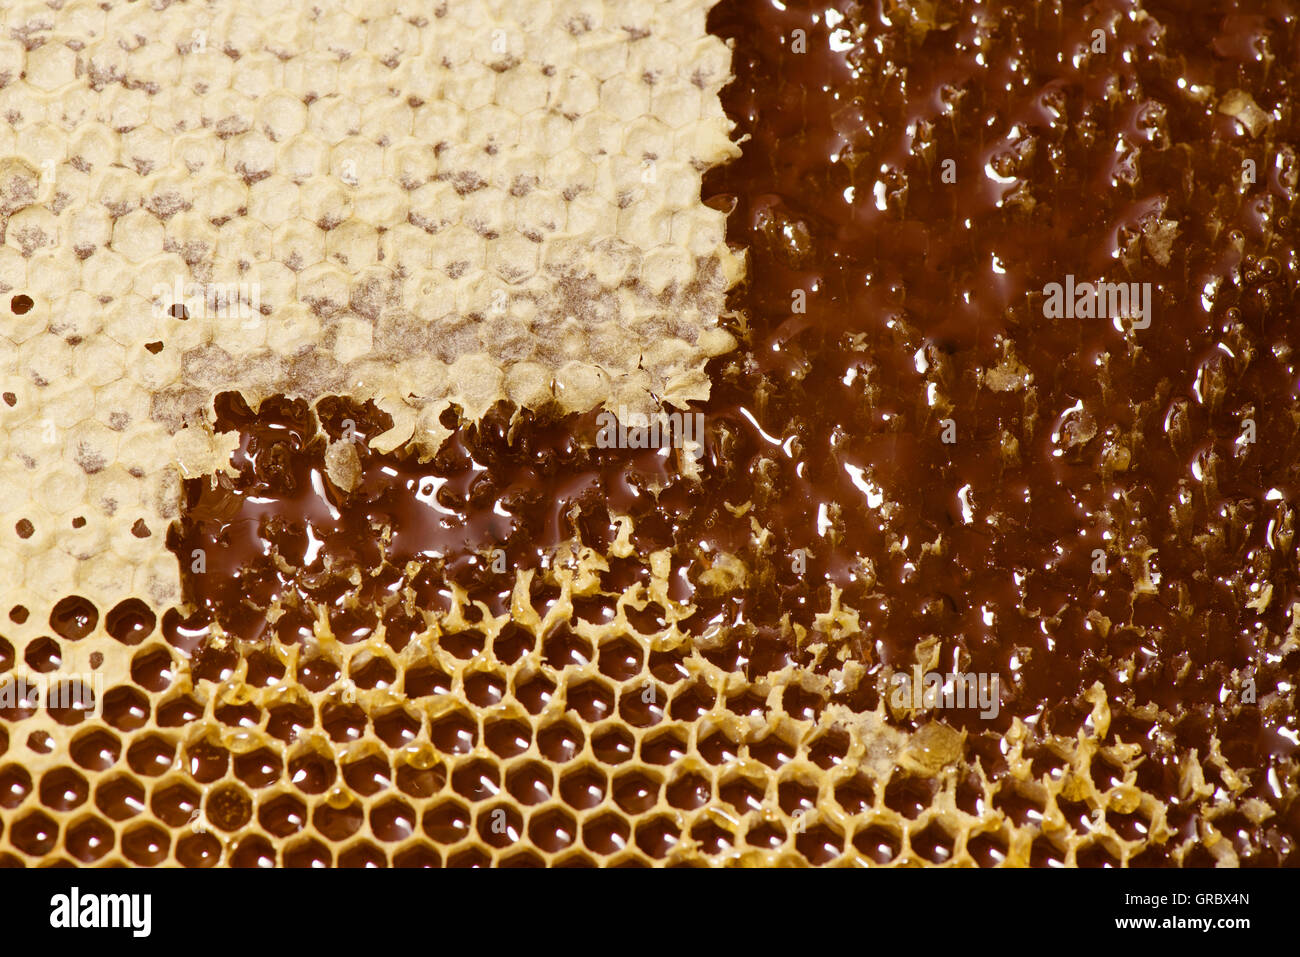 Honeycomb Cells Capped And Uncapped, Honey Is Flowing Out Stock Photo